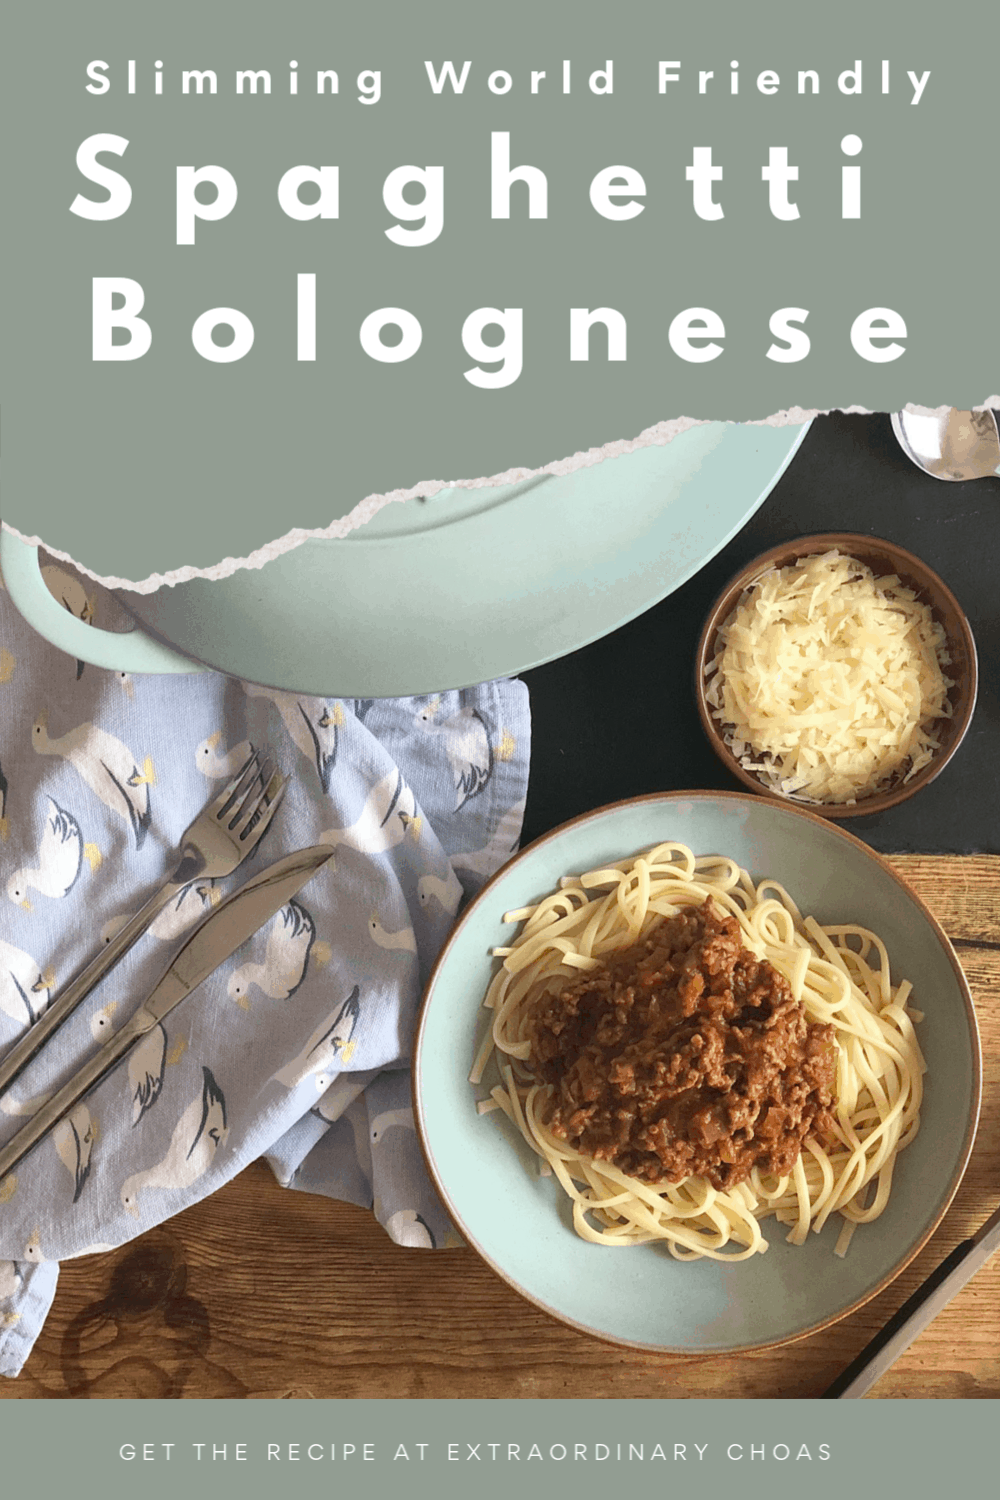 Slimming World Spaghetti Bolognese recipe, a low fat recipe that is easy to make and tastes delicious.